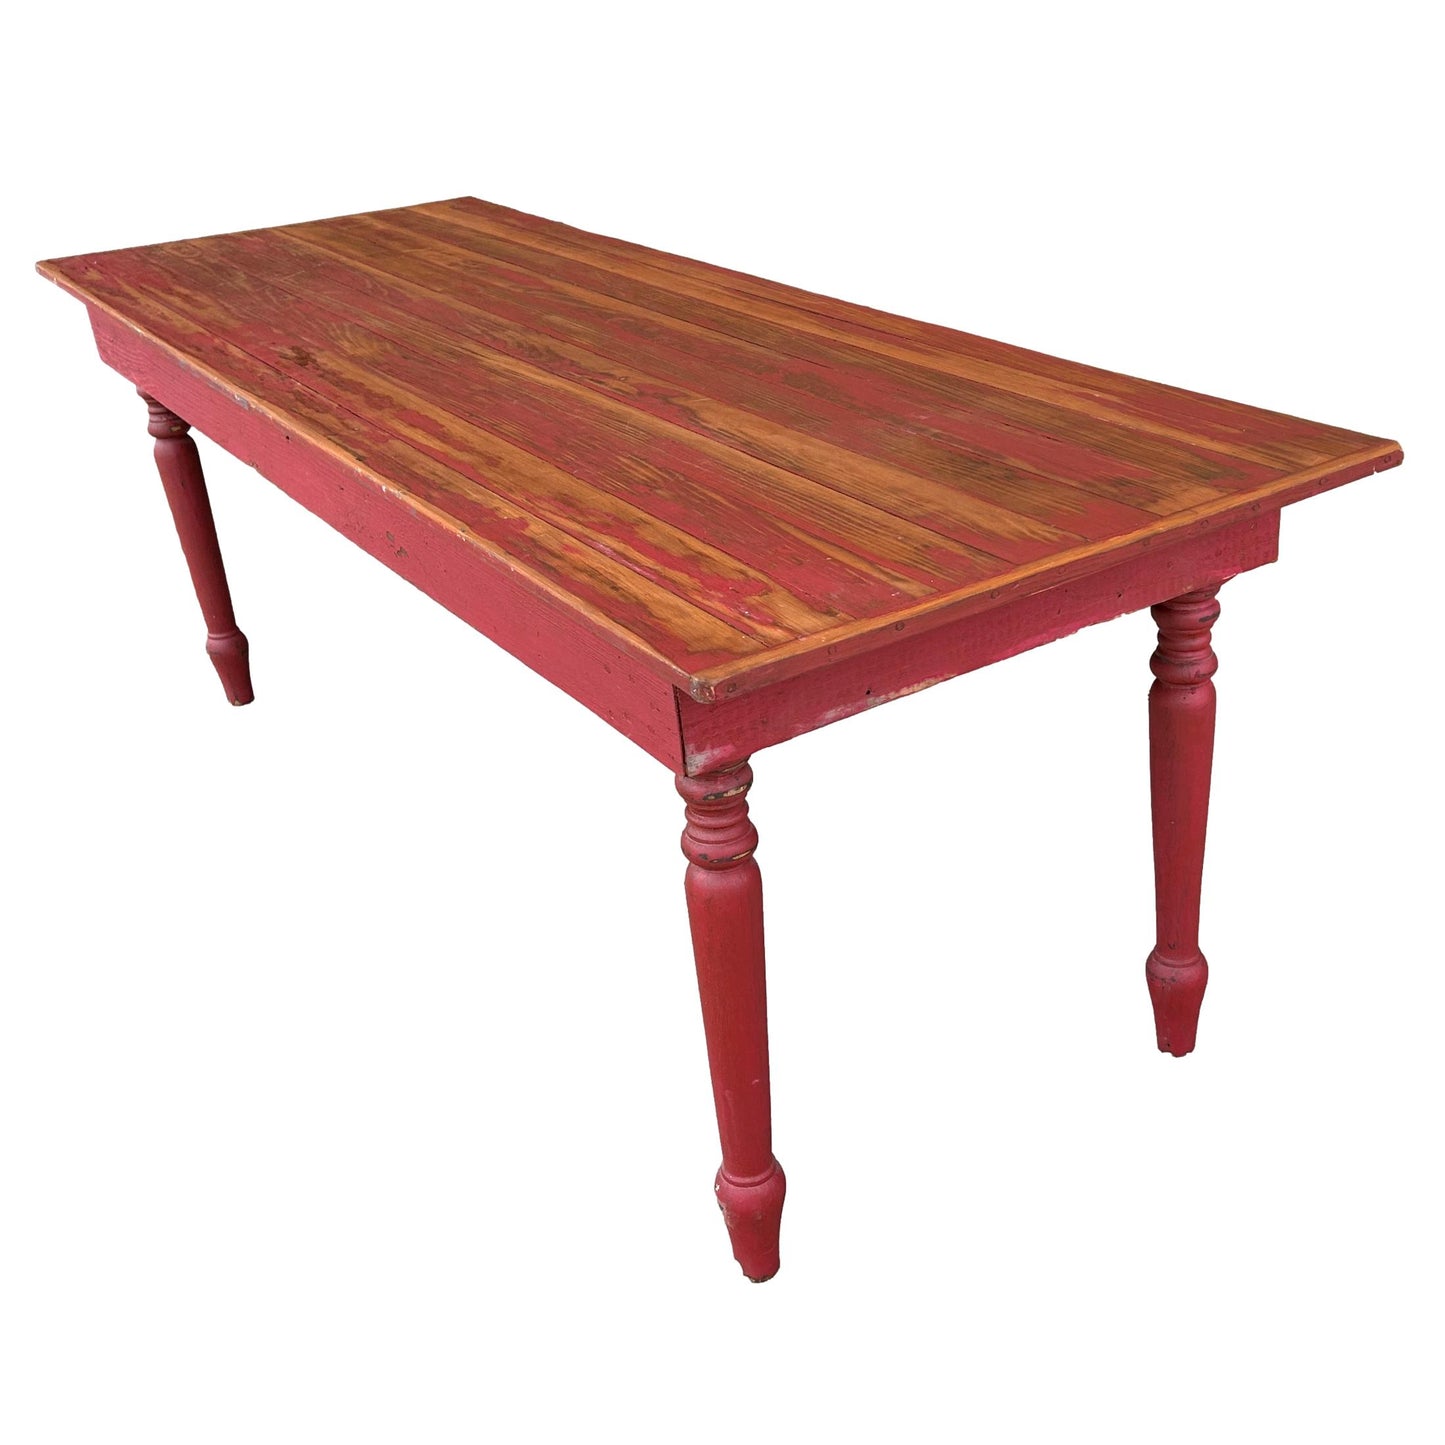 Red Barn Table